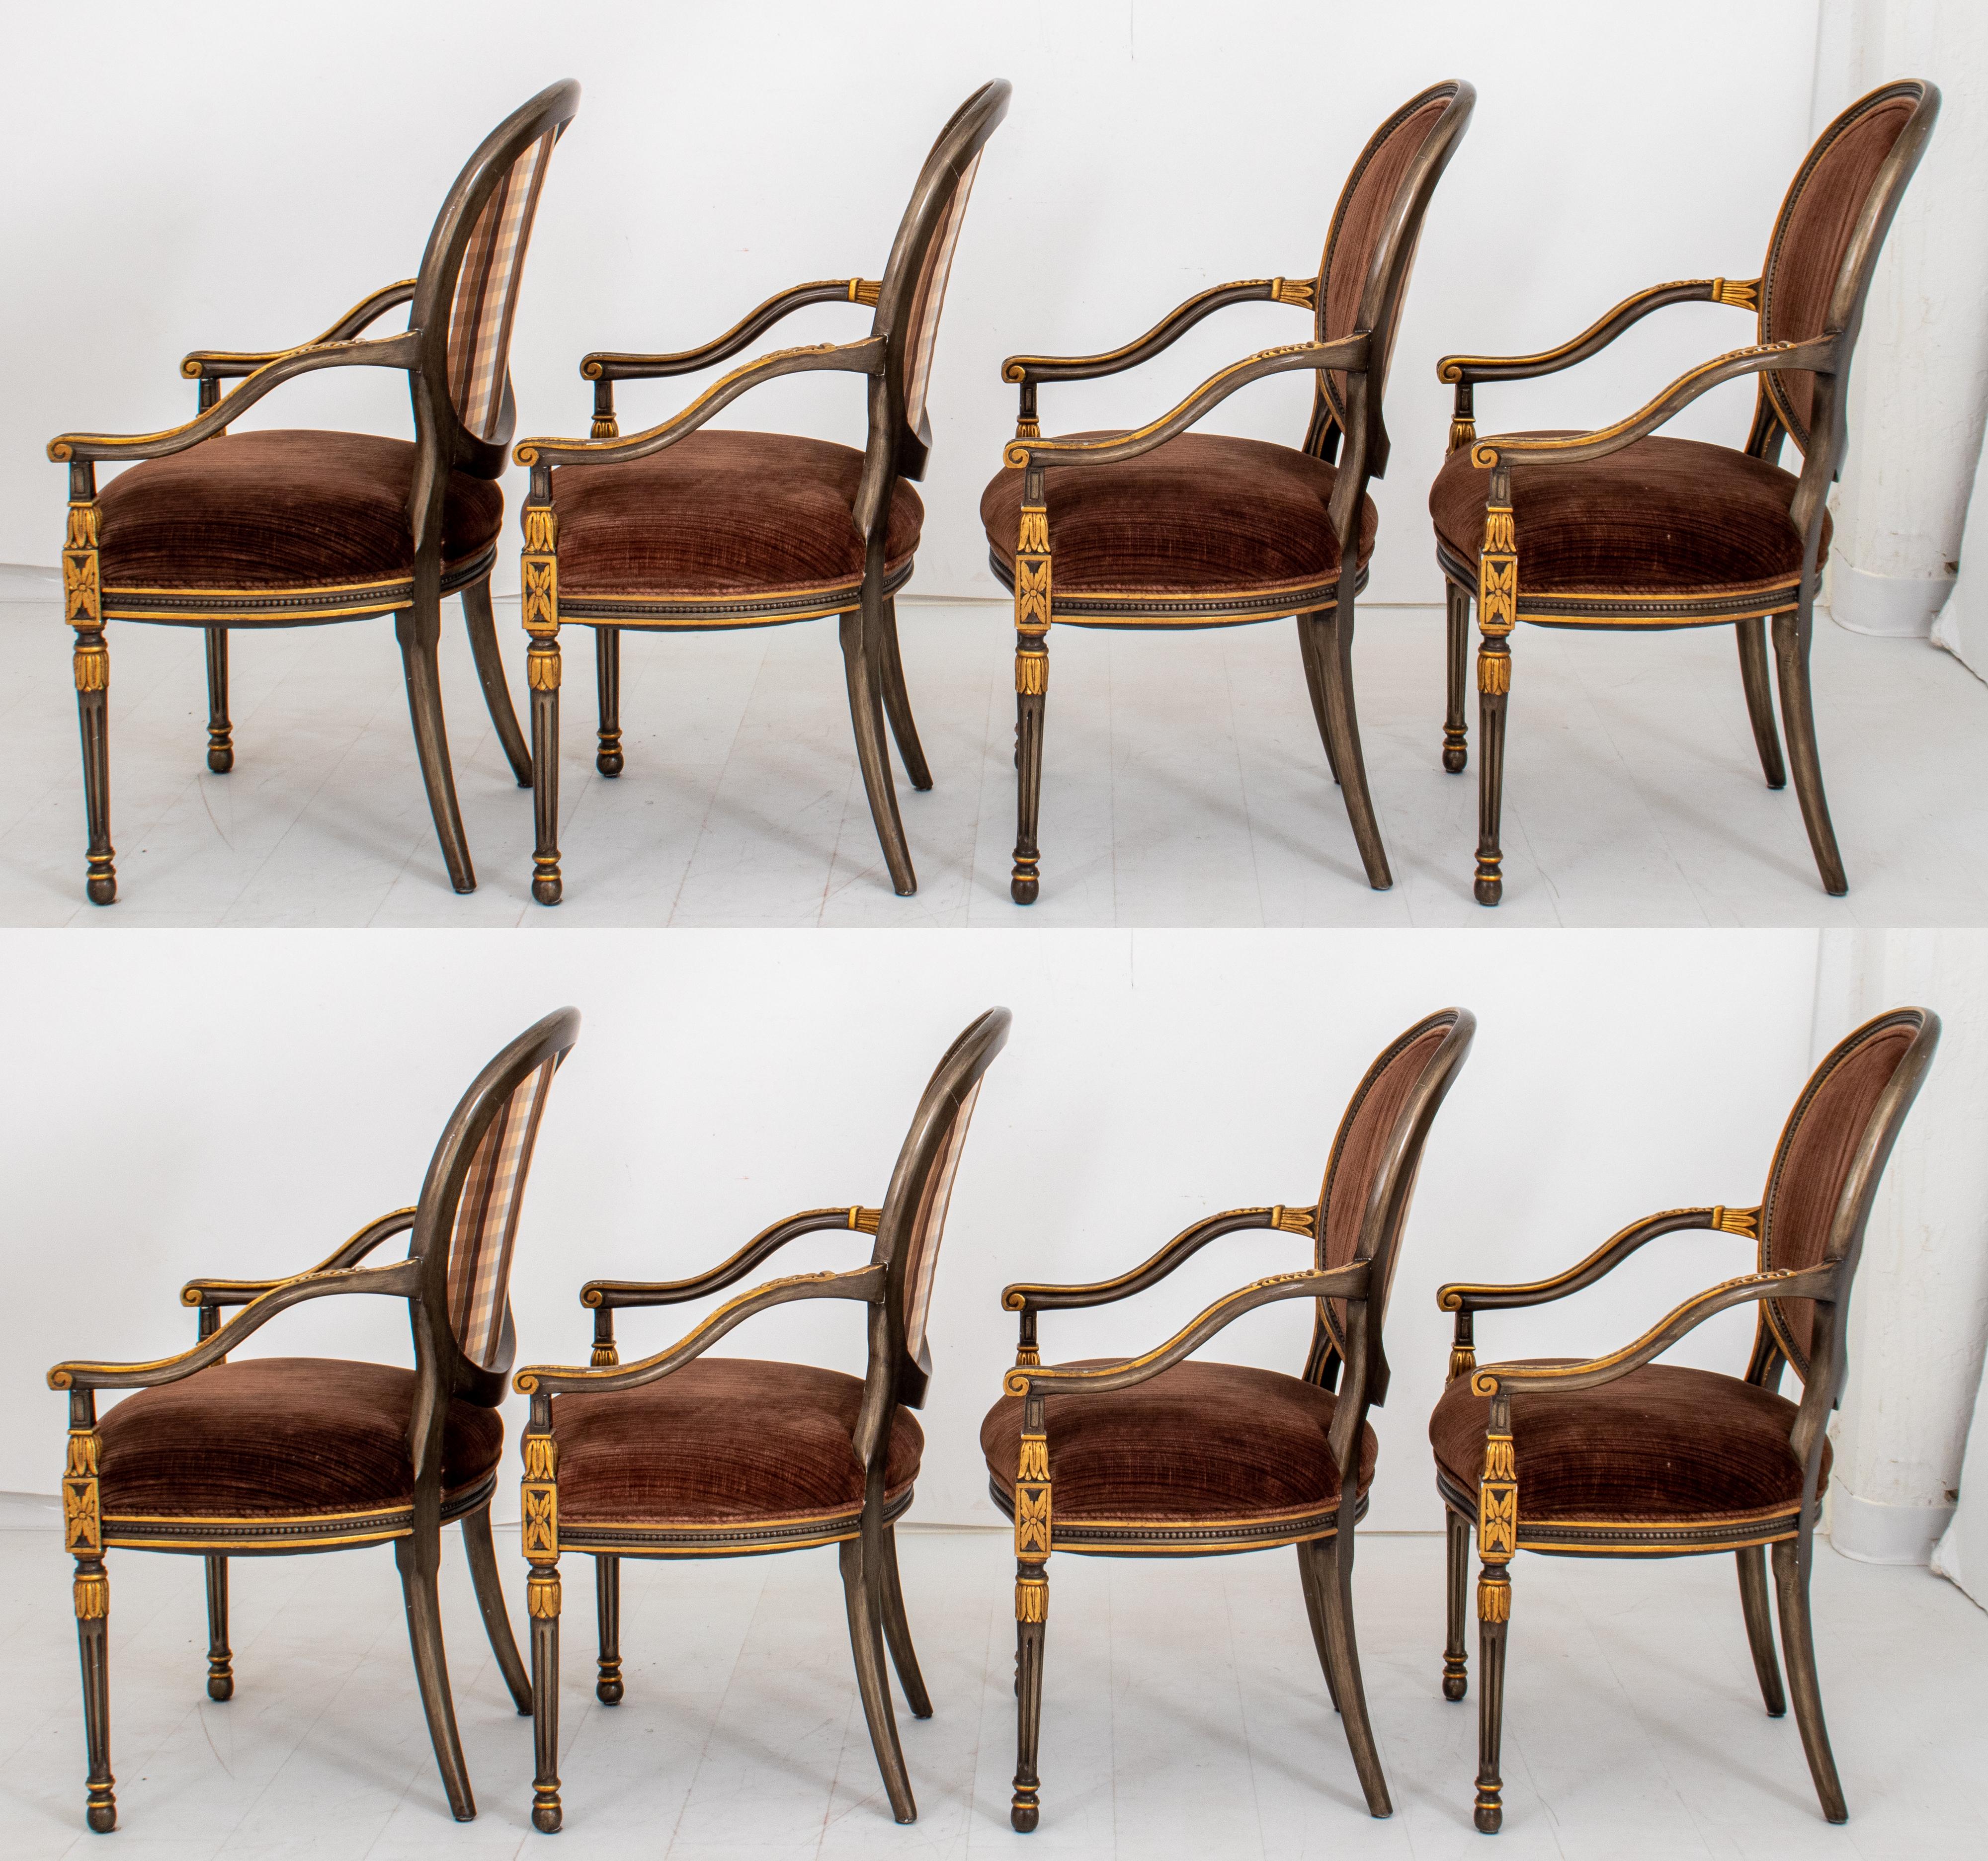 Set of eight Regency Revival dining chairs, the gilt wood arms with carved foliate designs, the ovoid backs and seats upholstered in brown velvet.

Dimensions: 40